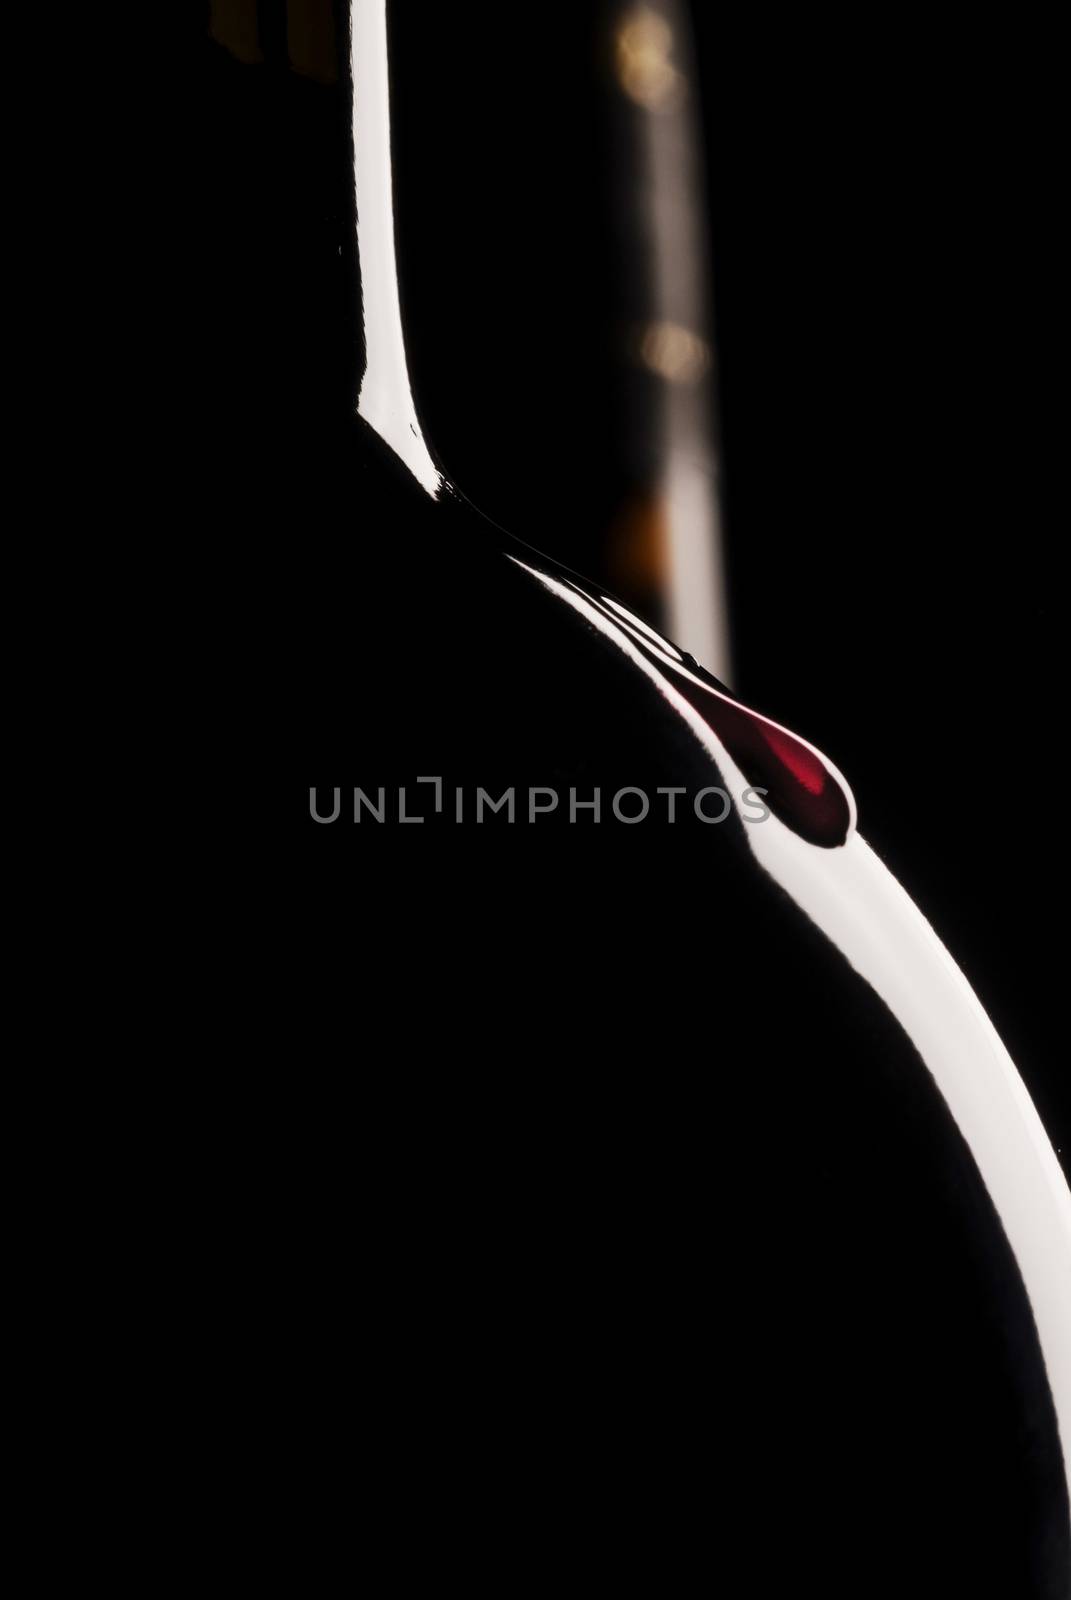 Silhouette of wine bottle, black background, two wine bottles, vertical, wine drop by jalonsohu@gmail.com